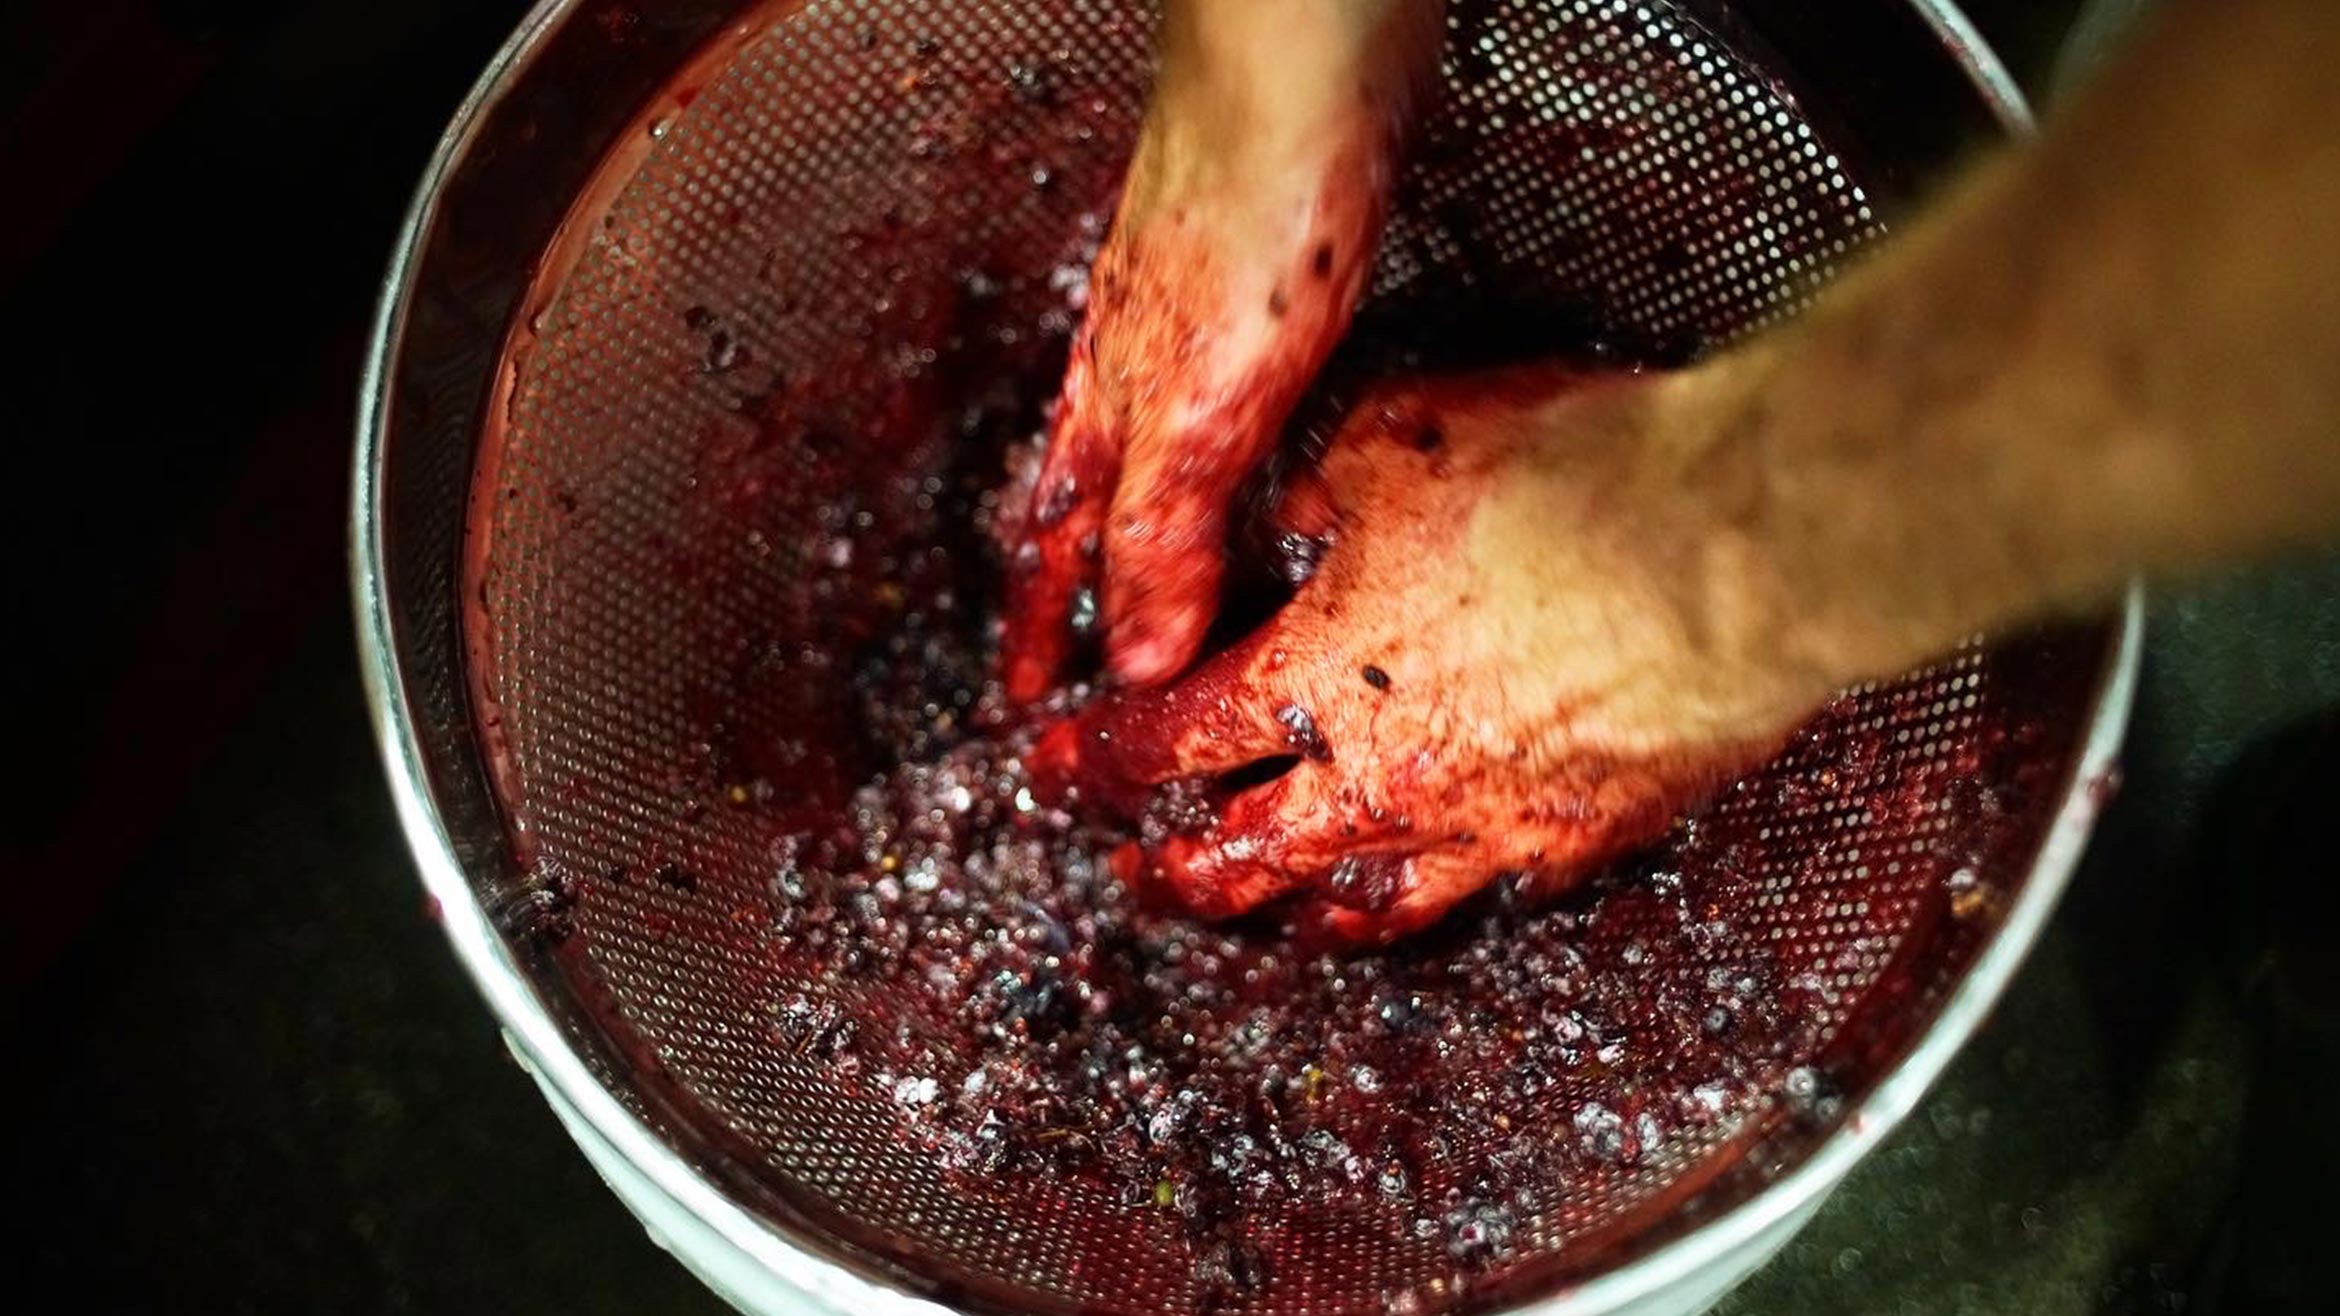 A close shot of a pair of hands macerating grapes in a large sieve